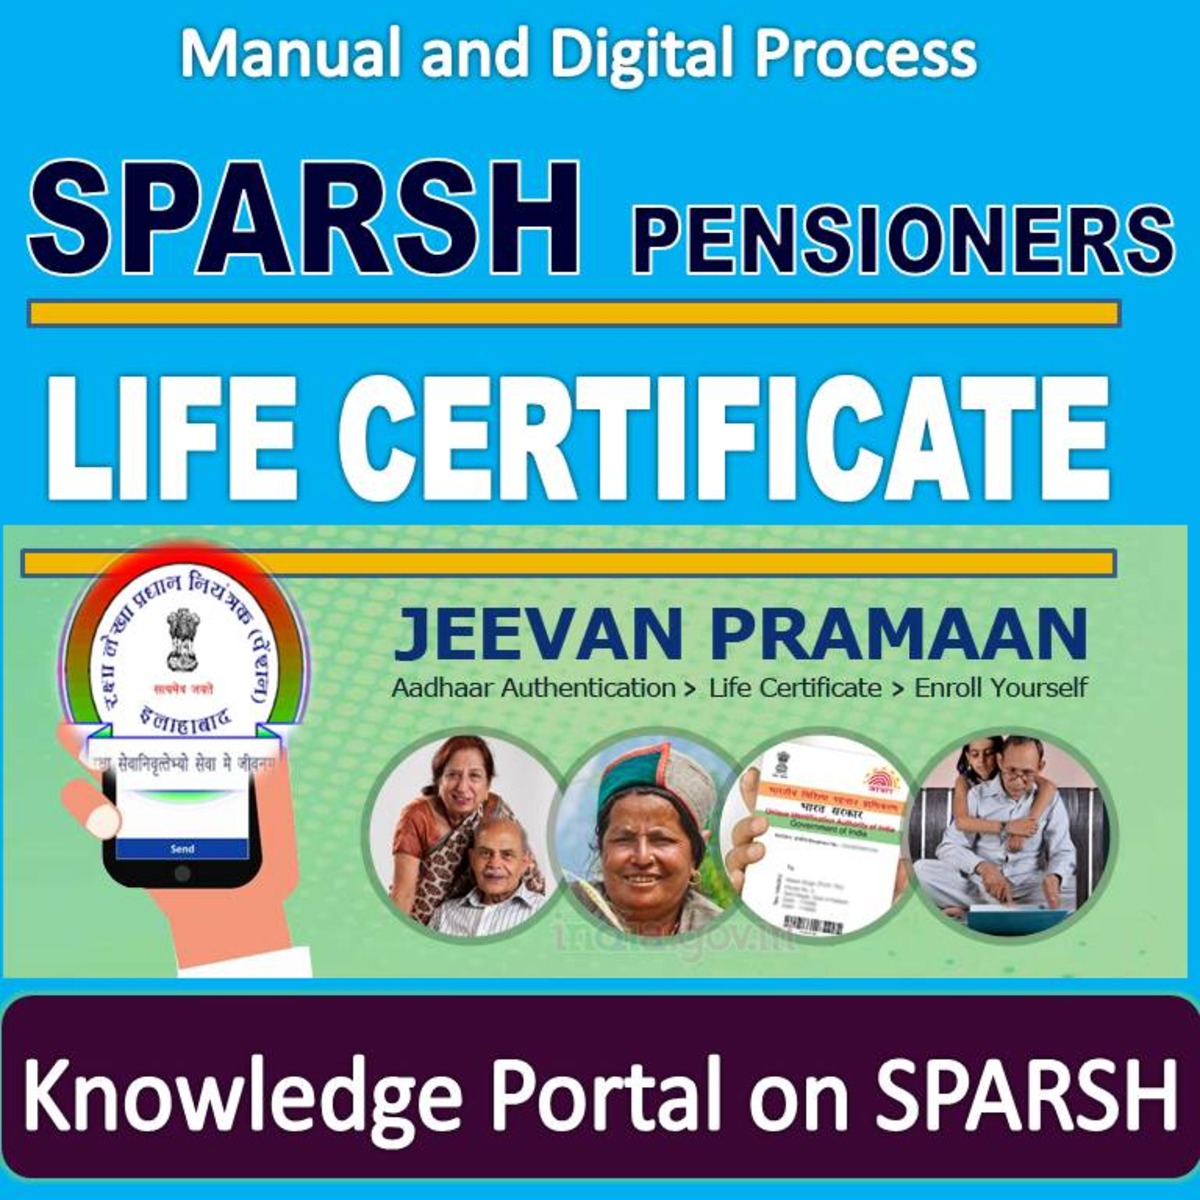 Extension of Annual Identification for SPARSH migrated pensioners: PCDA (Pension)